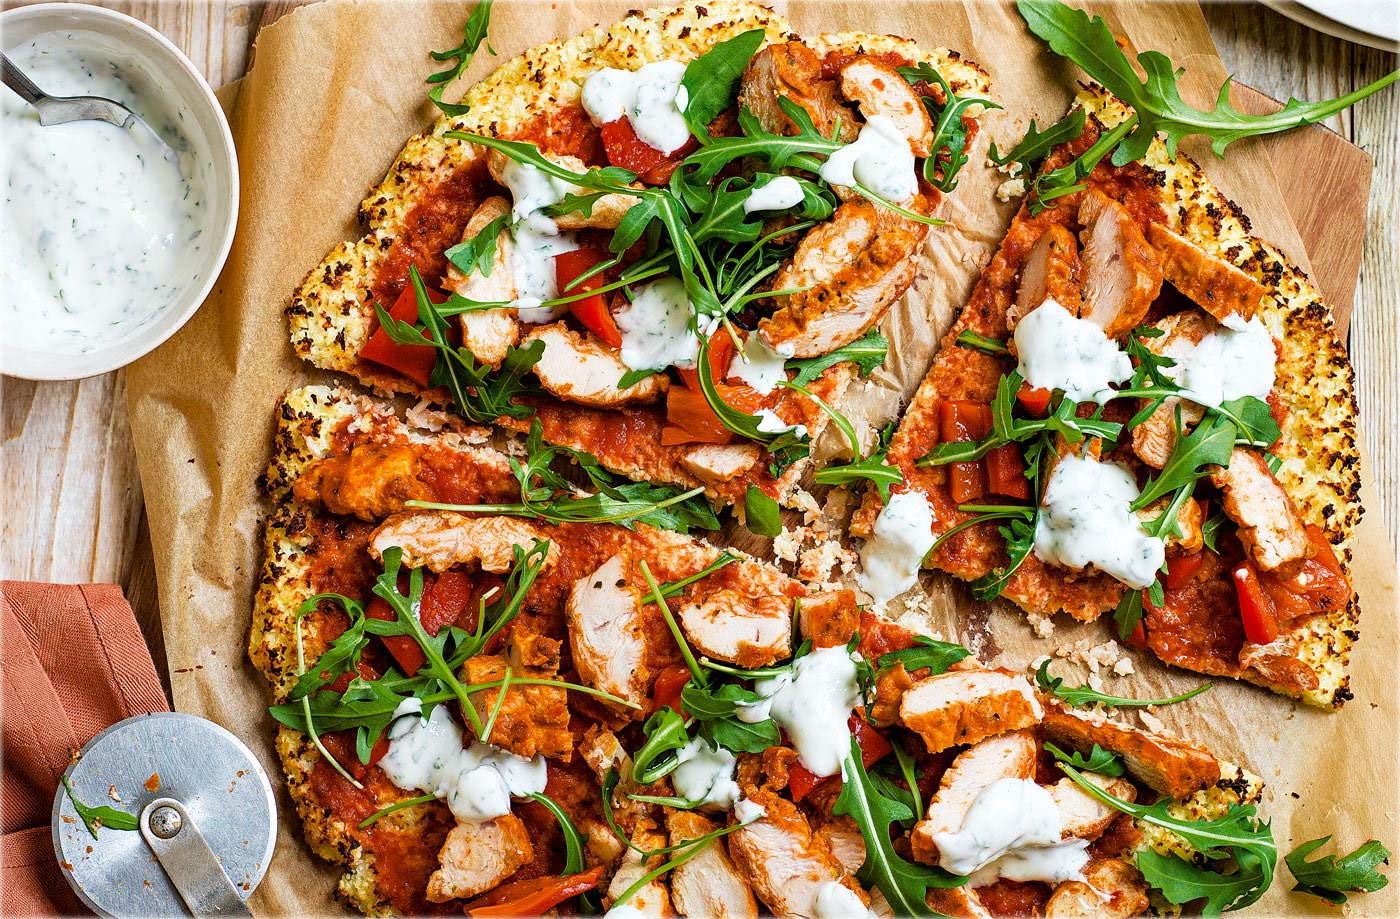 Only a Truly Cool Person Will Have Eaten at Least 13/25 of These Foods cauliflower pizza crust